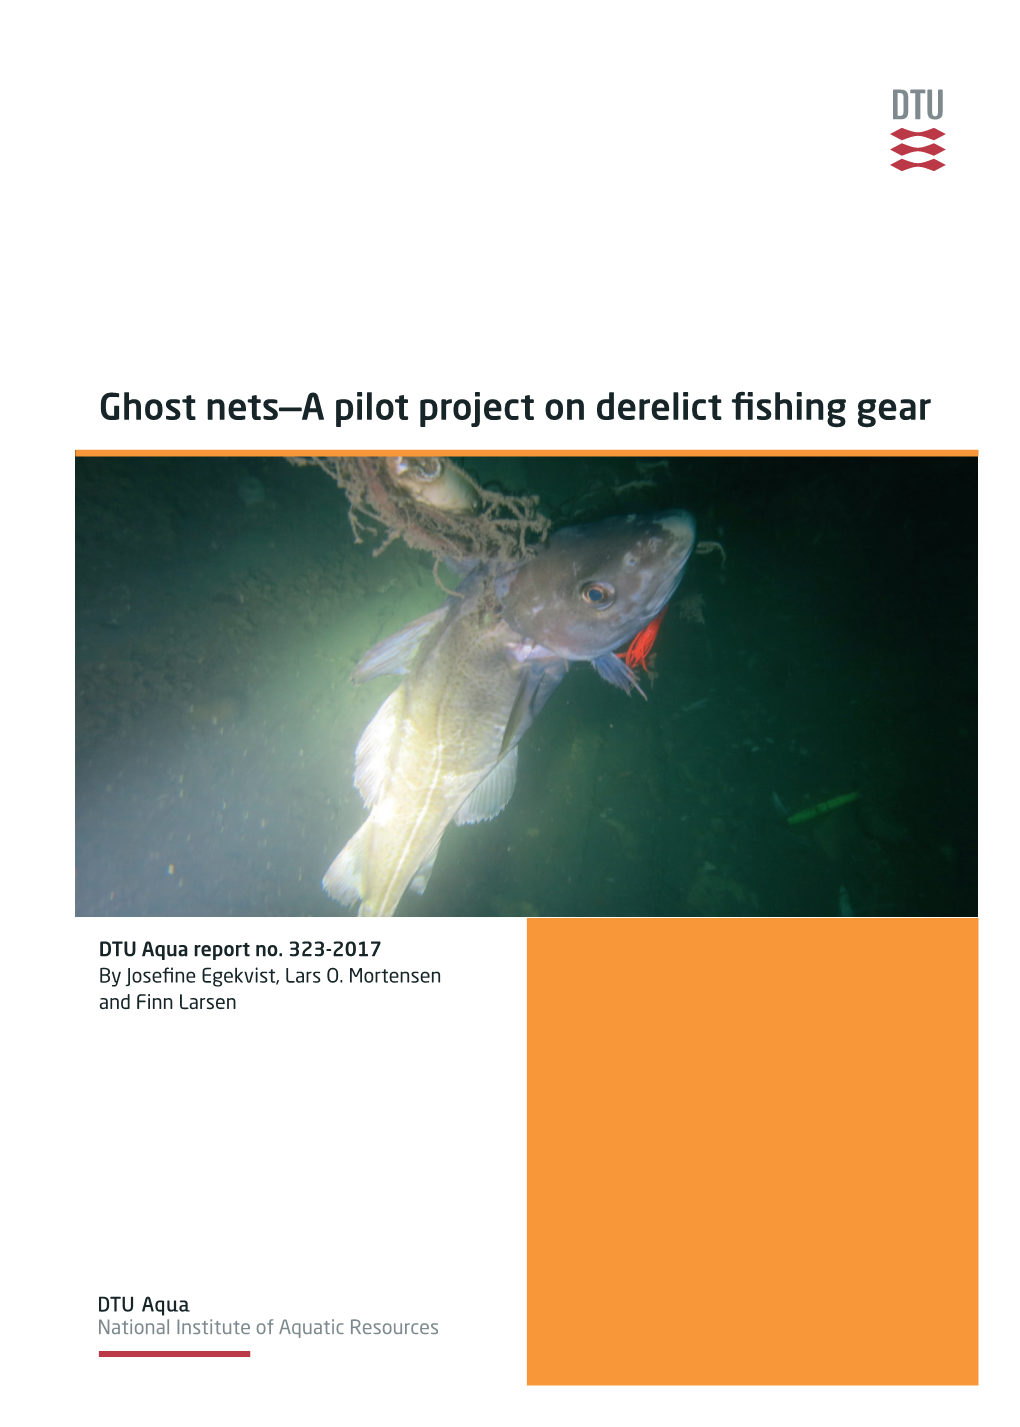 Ghost Nets—A Pilot Project on Derelict Fishing Gear